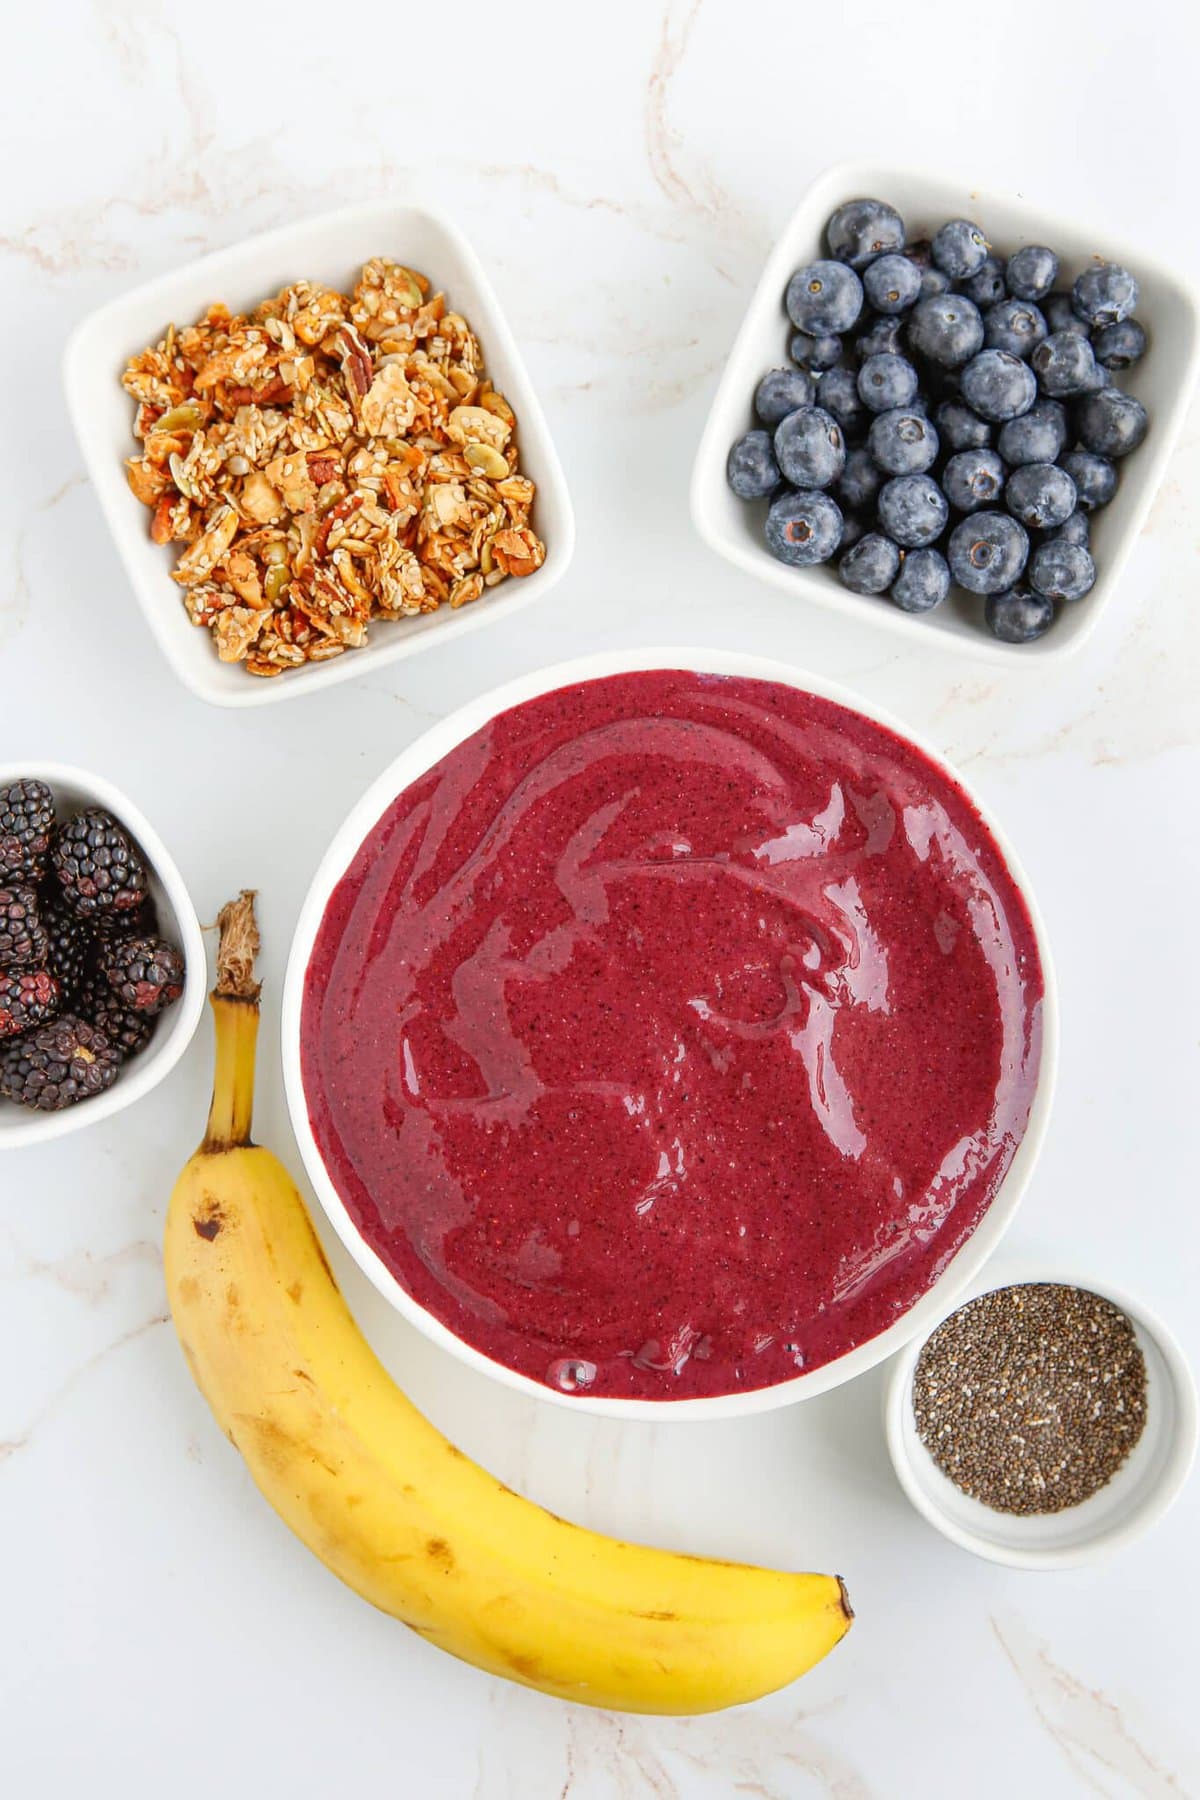 The bowl of smoothie surrounded by ingredients.